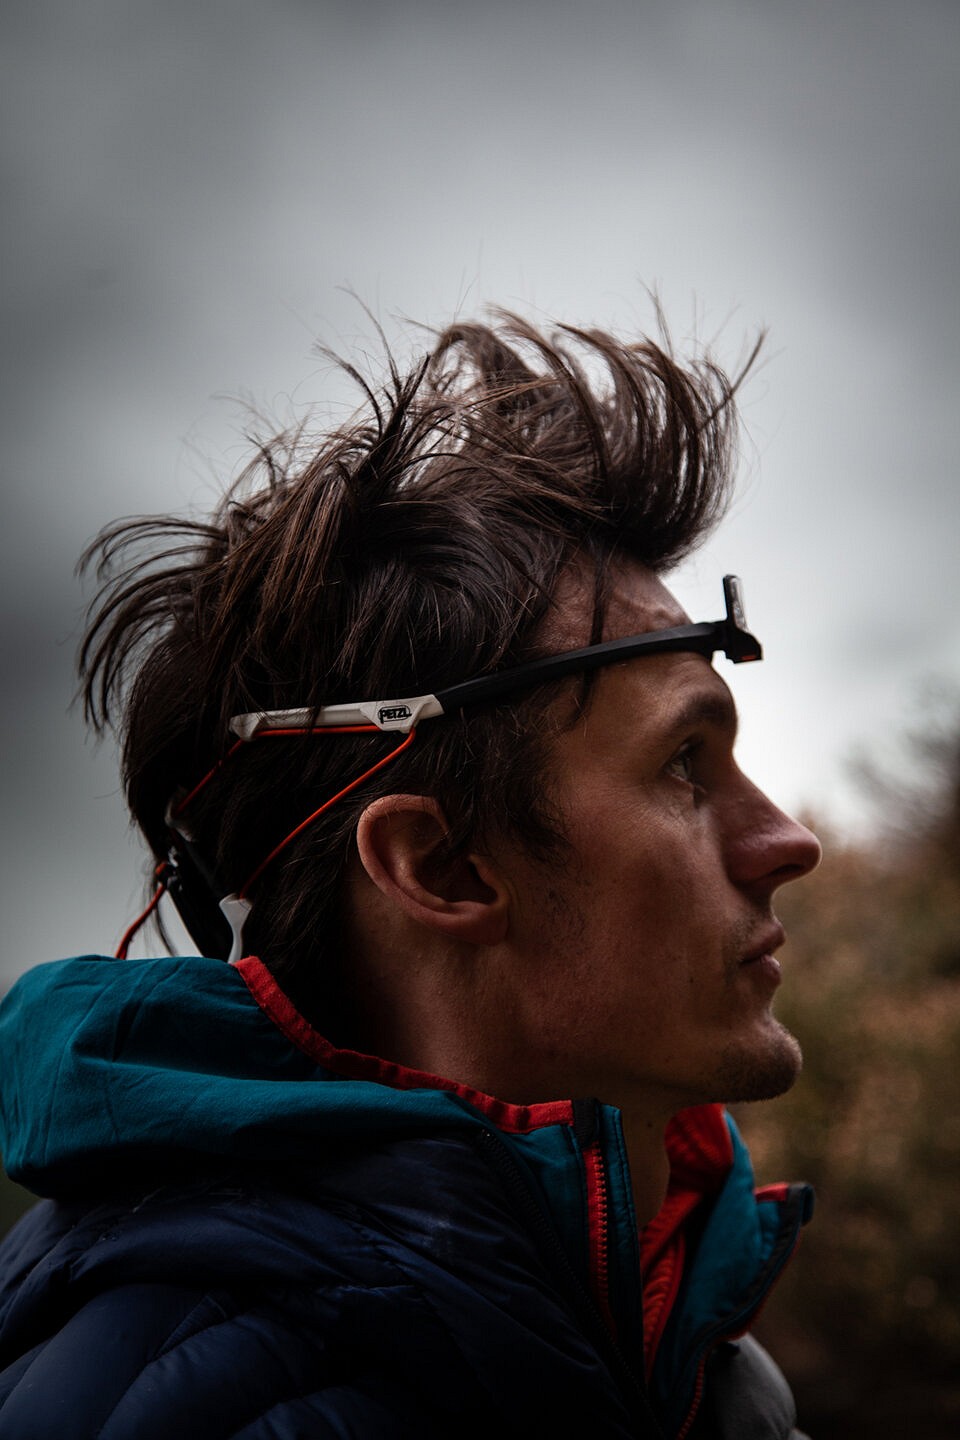 The IKO has an extremely low profile design, which sits close to the head  © UKC Gear